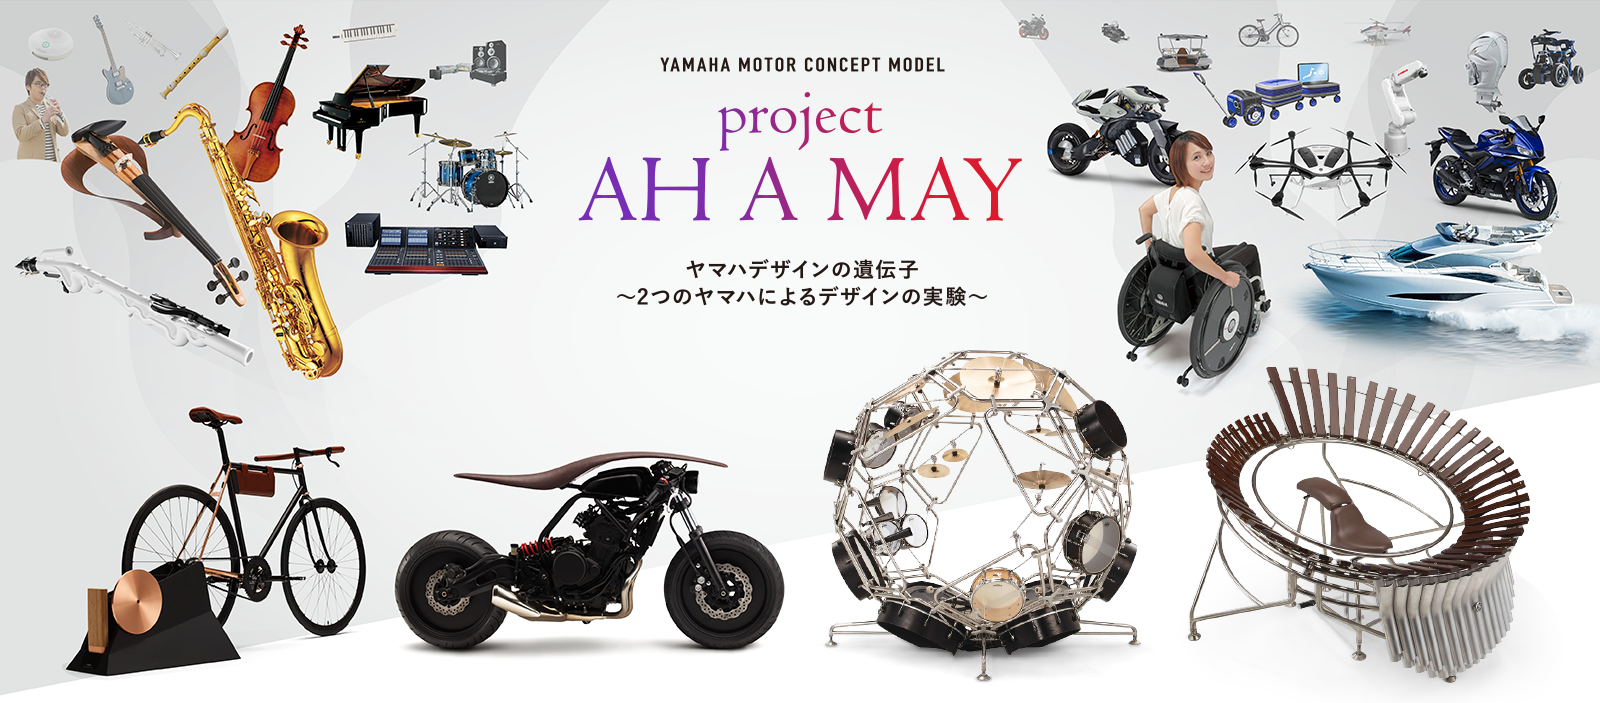 project AH A MAY